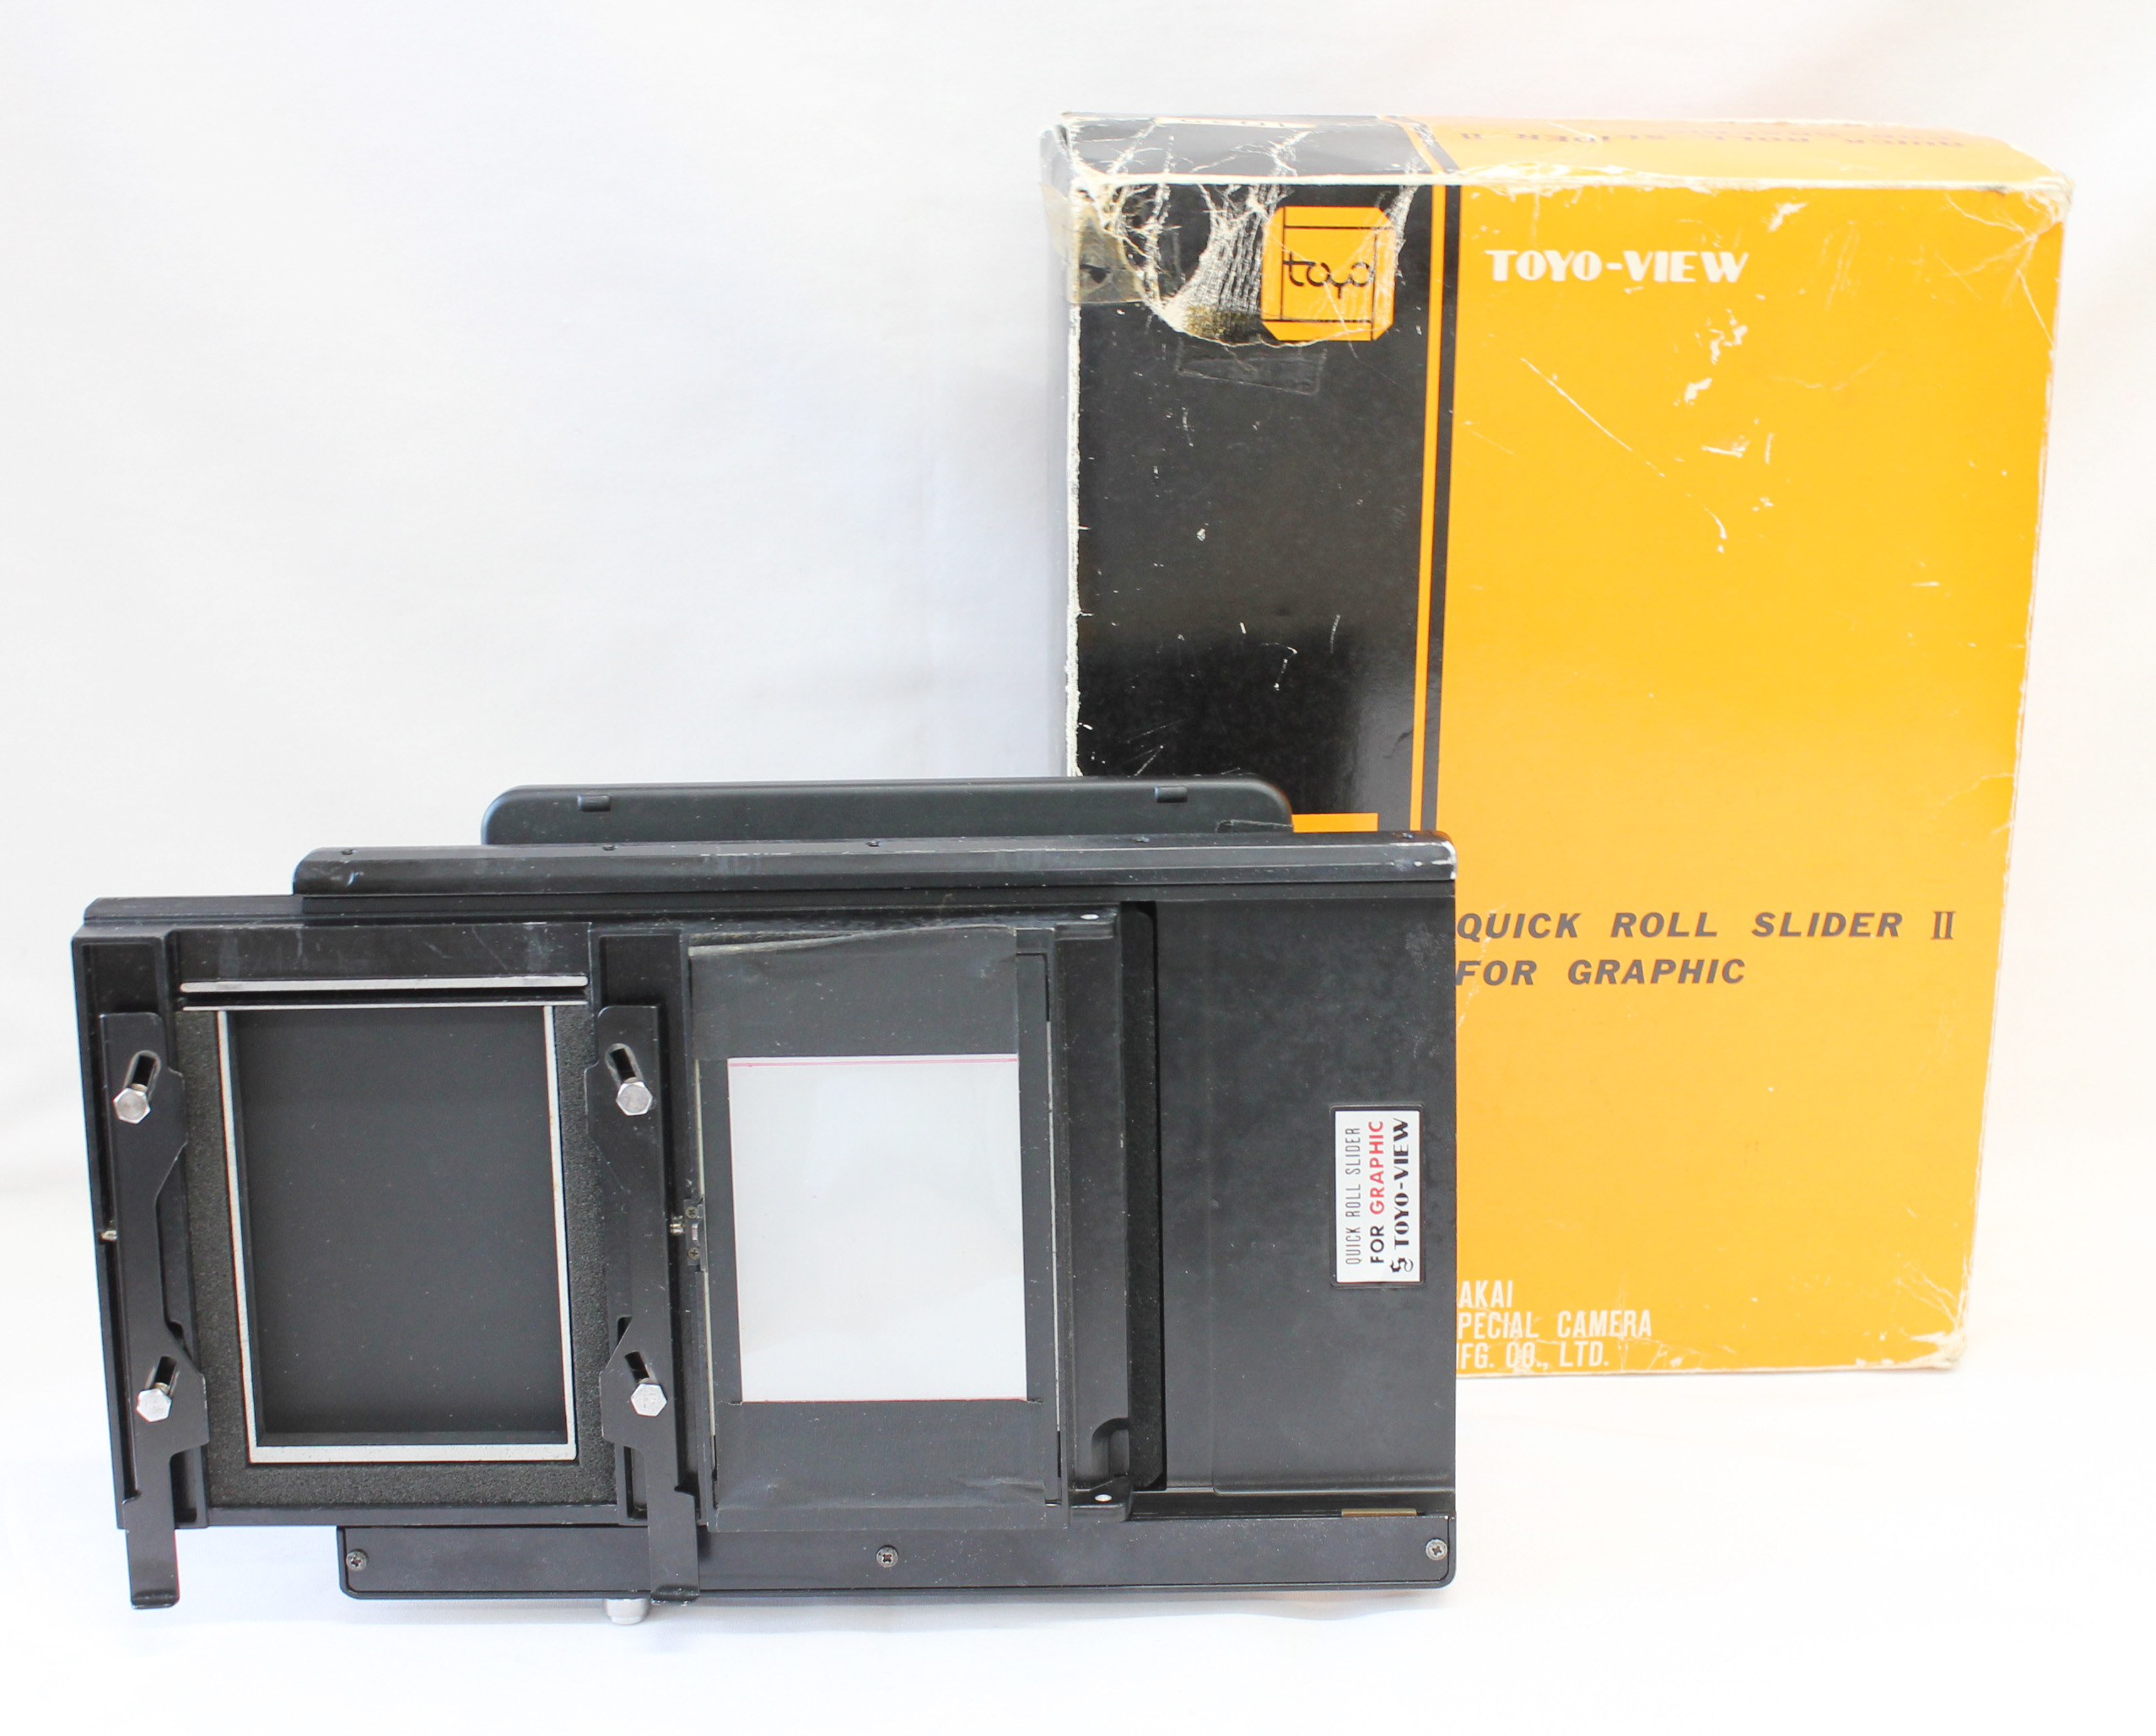 Toyo Toyo-View Quick Roll Slider II for Graphic No.1035 SG II 4V in Box from Japan Photo 0